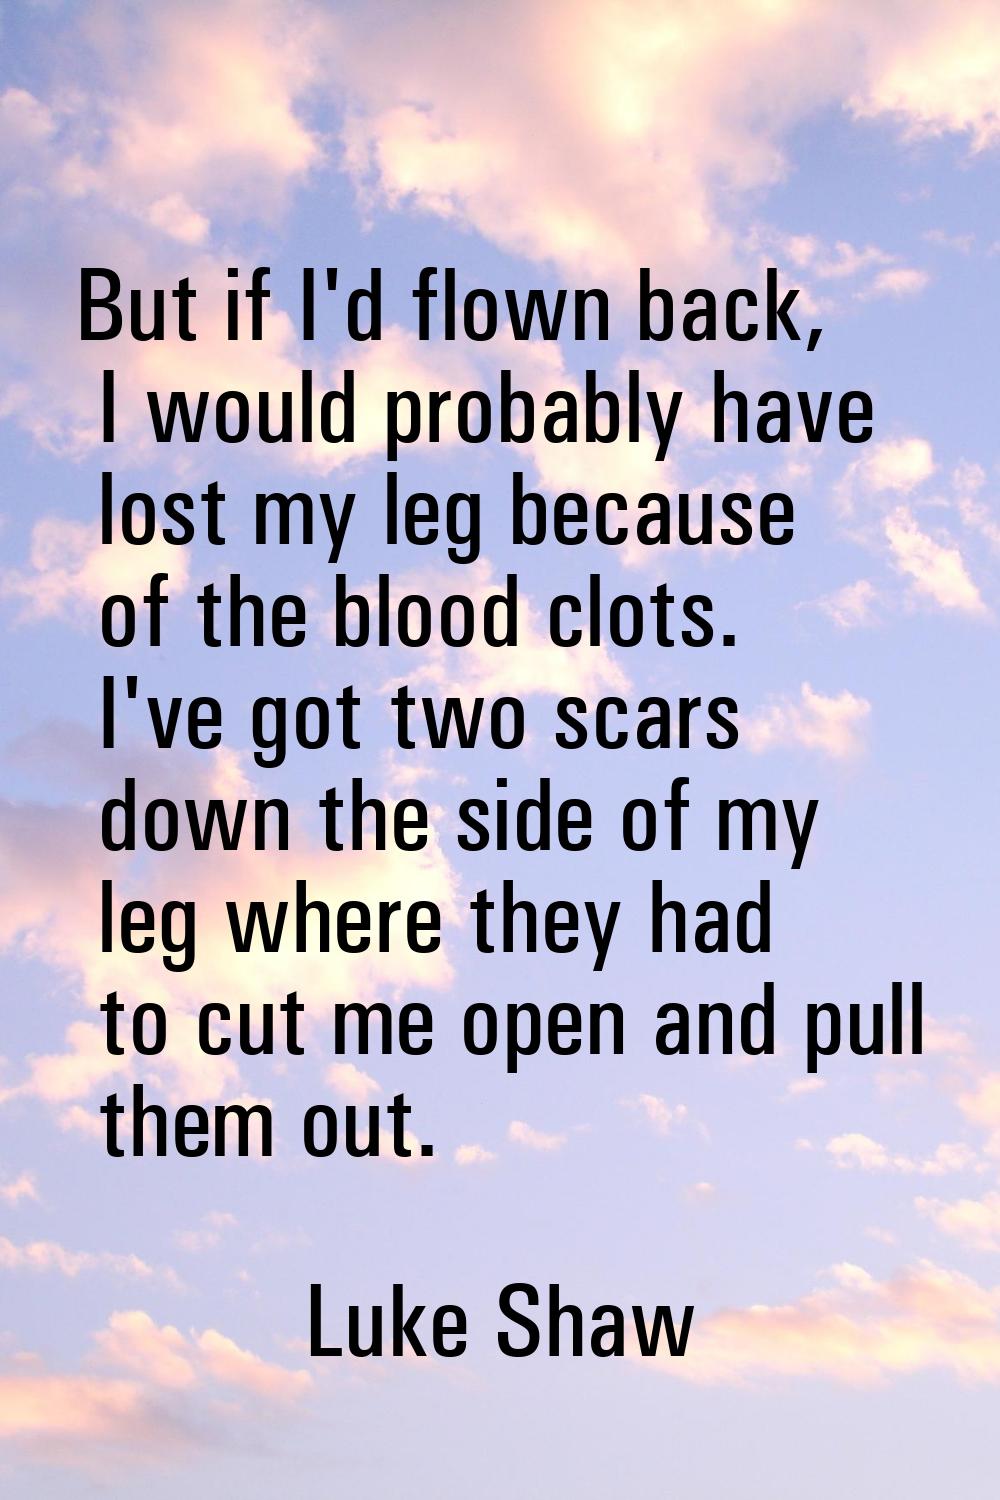 But if I'd flown back, I would probably have lost my leg because of the blood clots. I've got two s